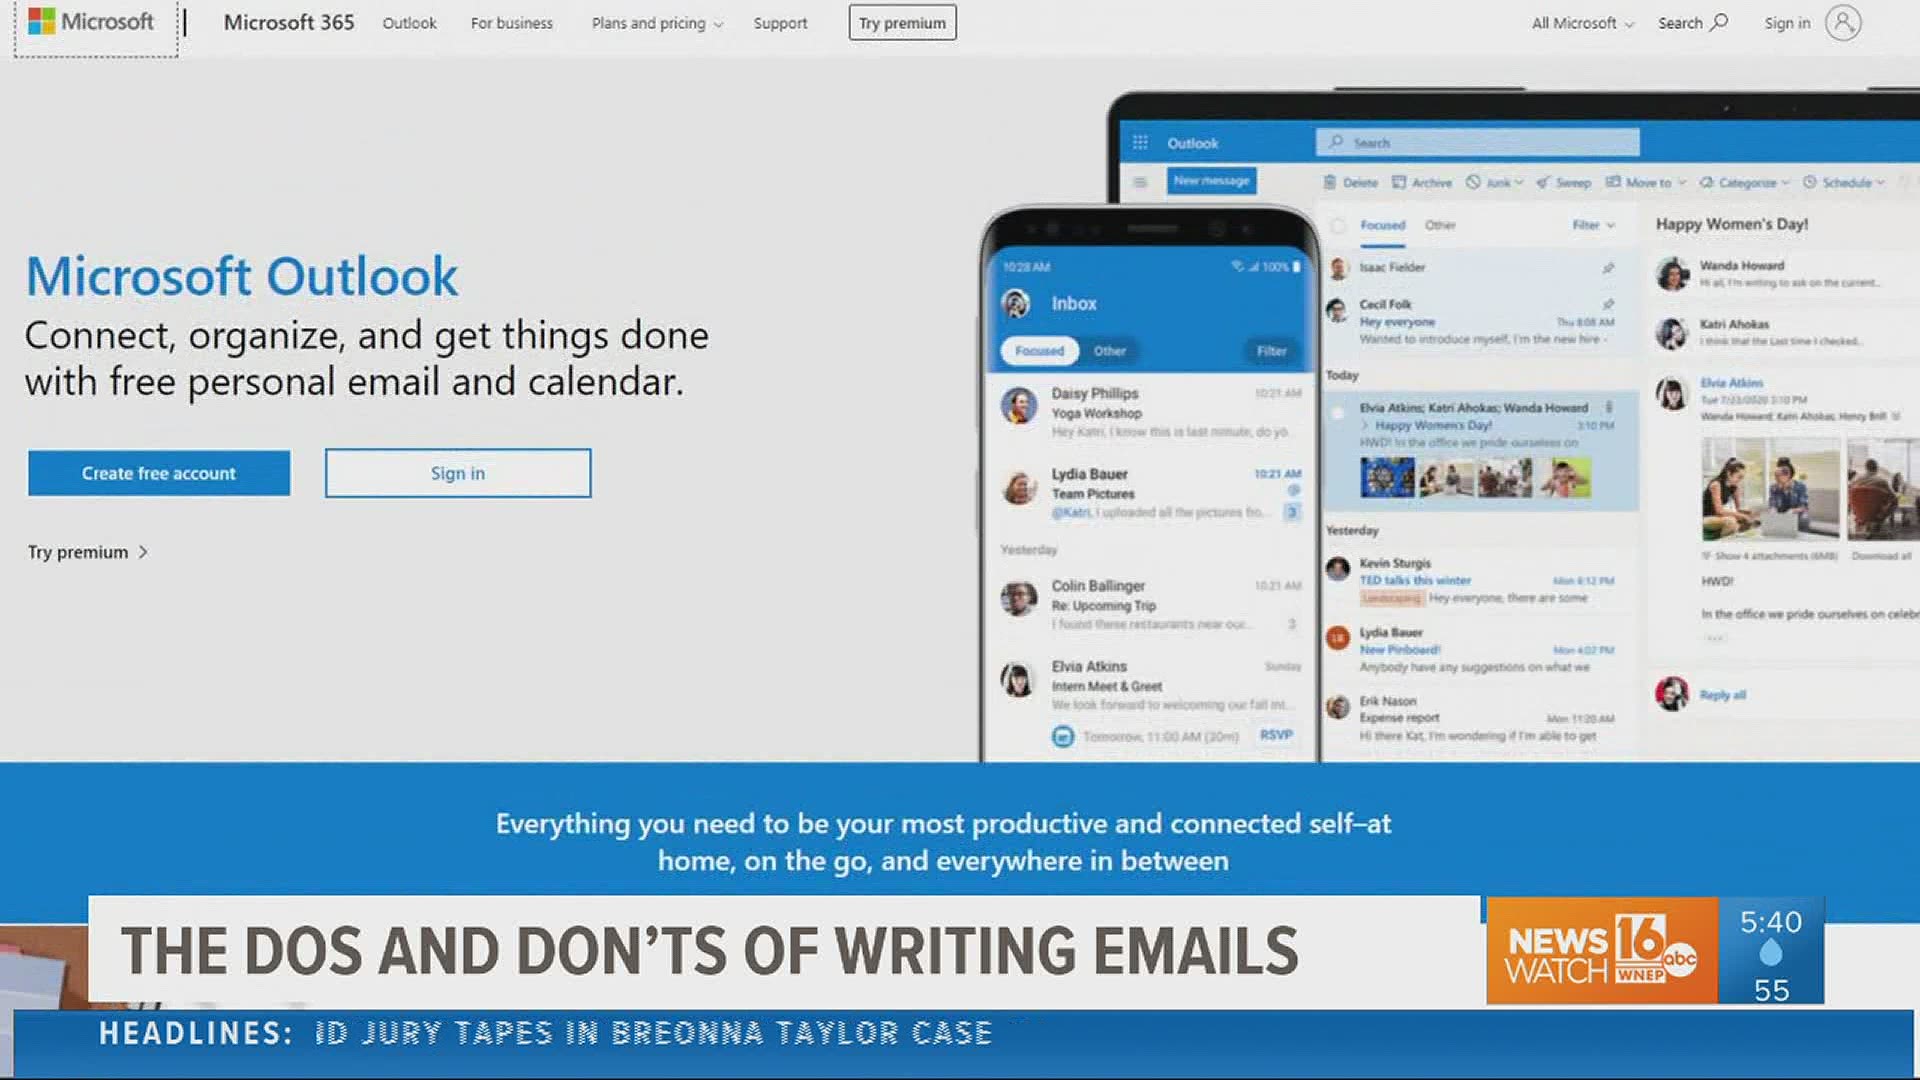 If you use email while working from home, there's something you may want to consider before hitting send. Newswatch 16's Ryan Leckey explains.